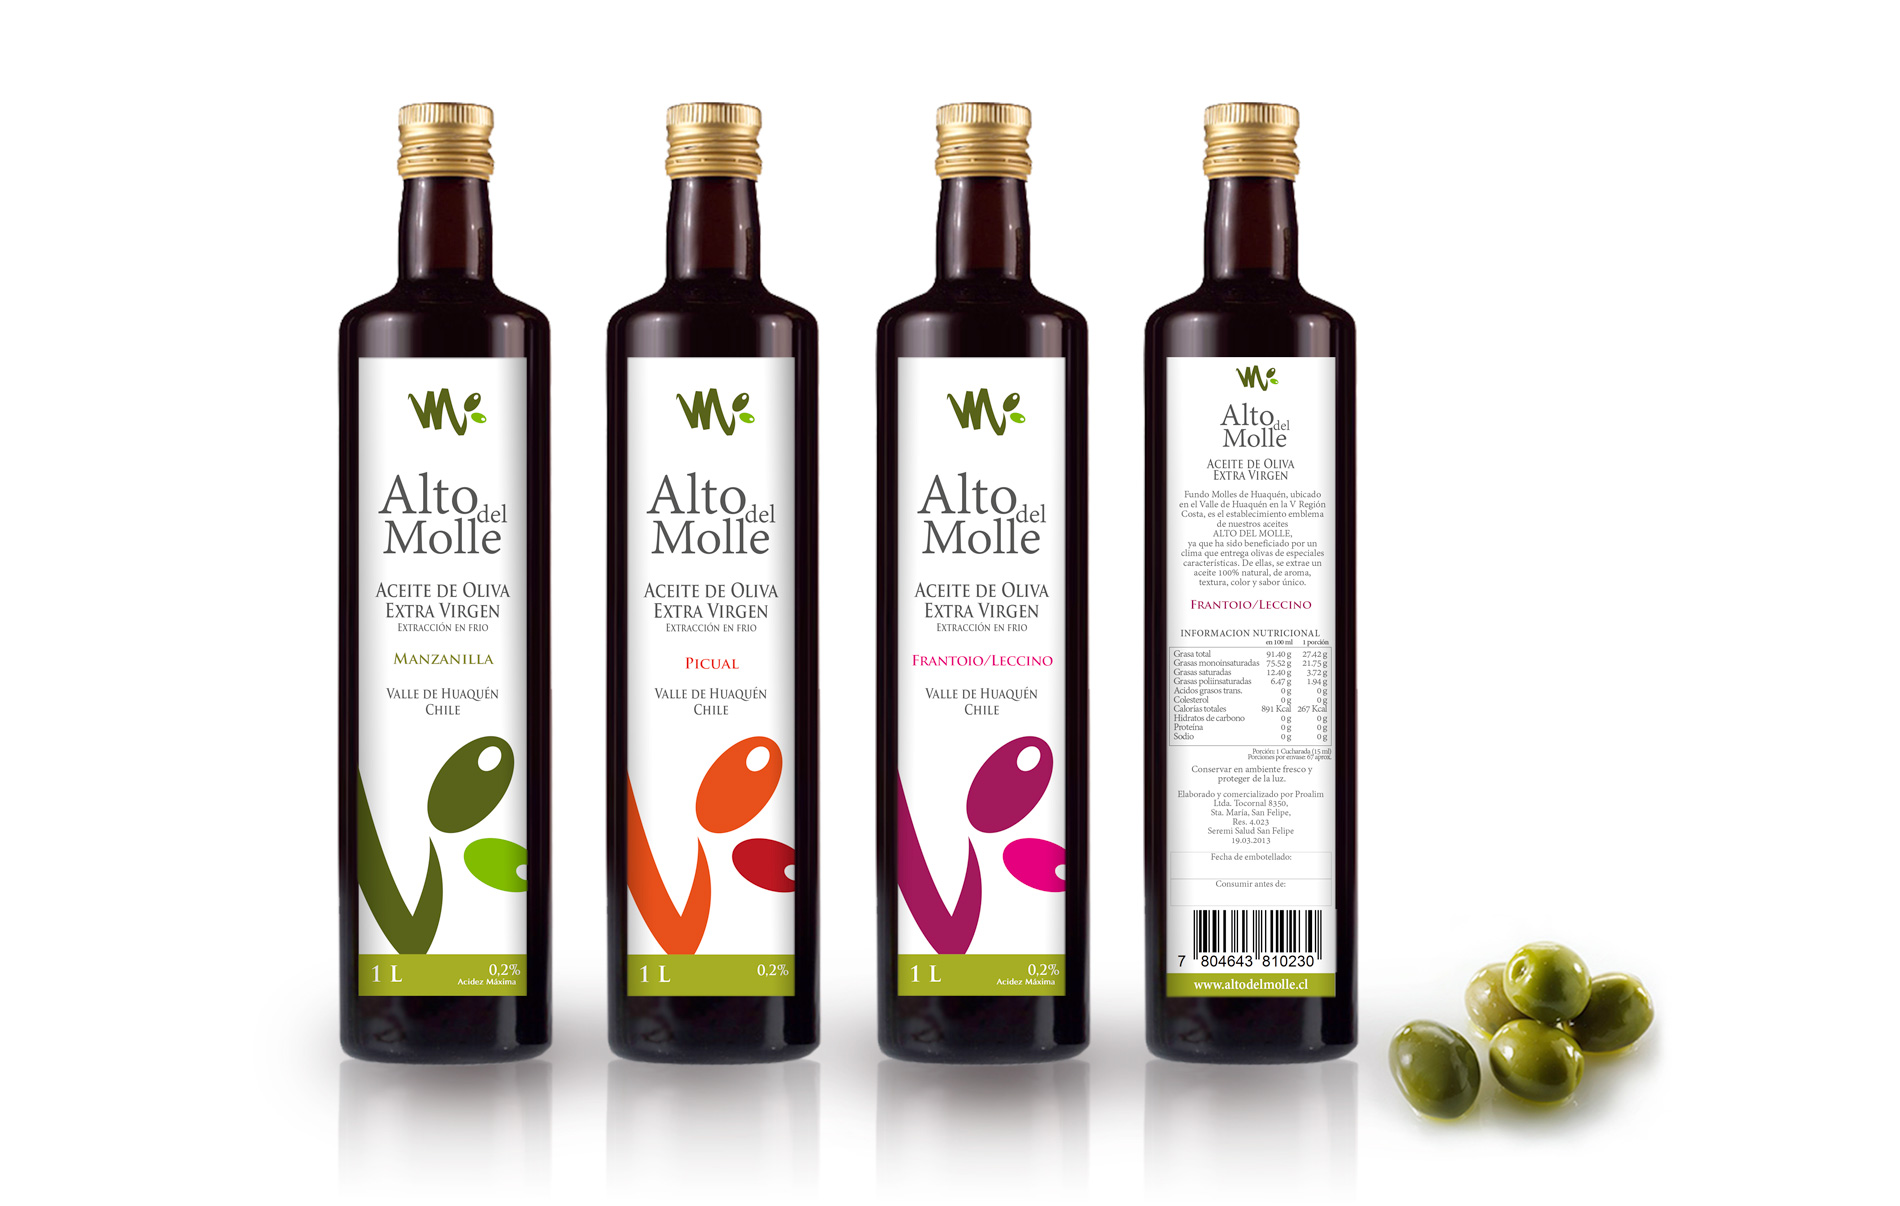 Portfolio of graphic and creative design works of extra virgin olive oil label design and packaging for oils in Chile ALTO DEL MOLLE